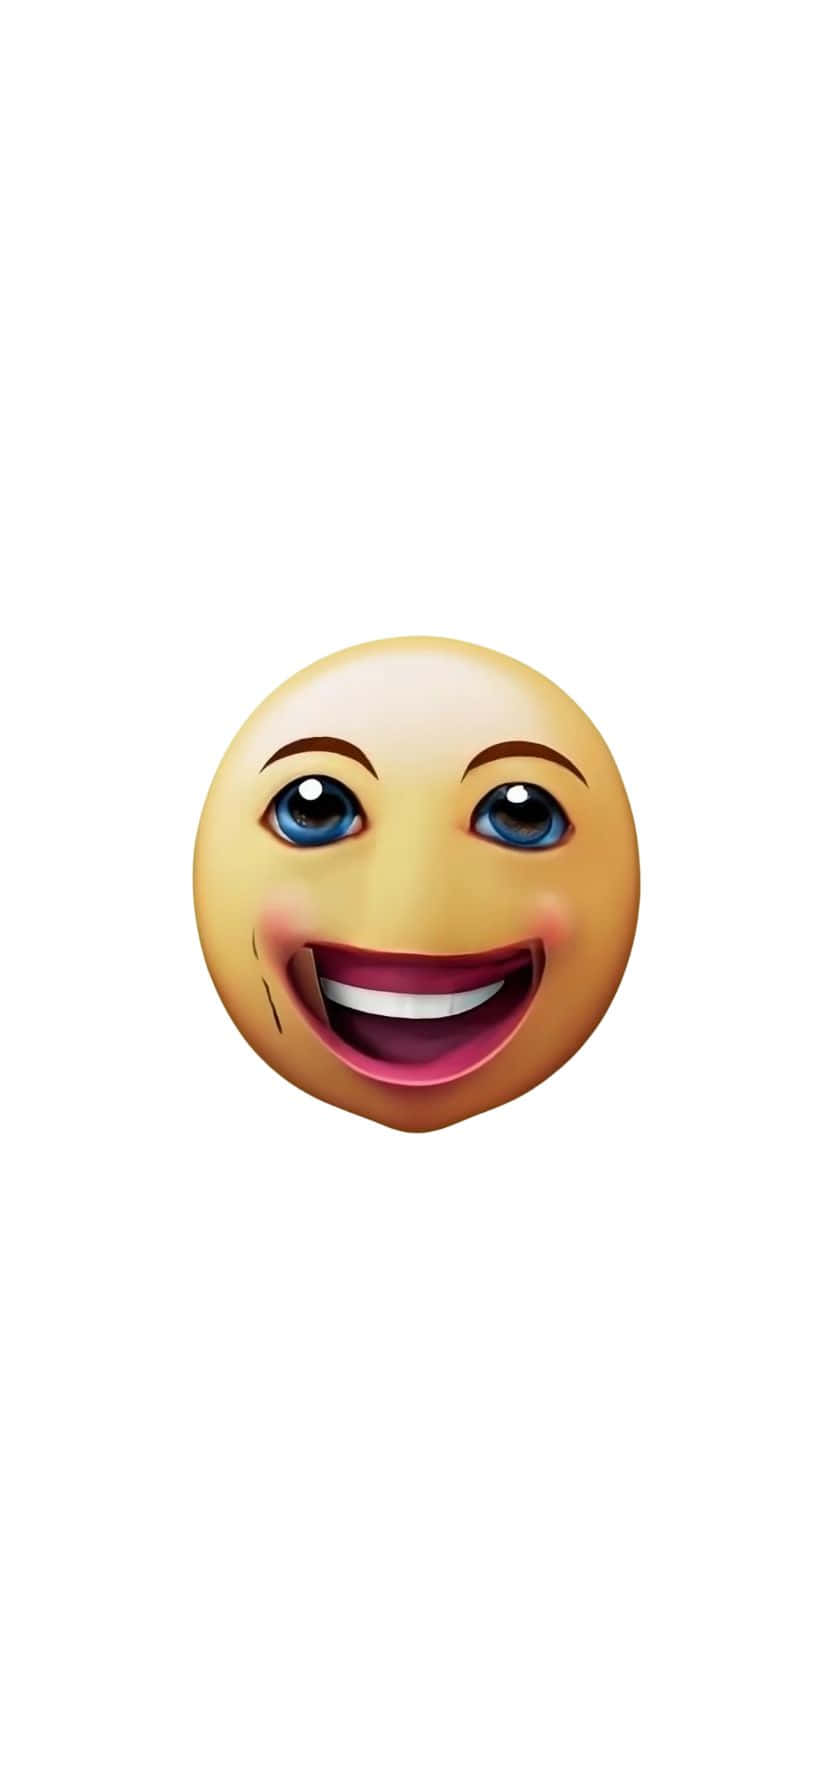 Funny_ Emoji_with_ Eyes_and_ Mouth Wallpaper